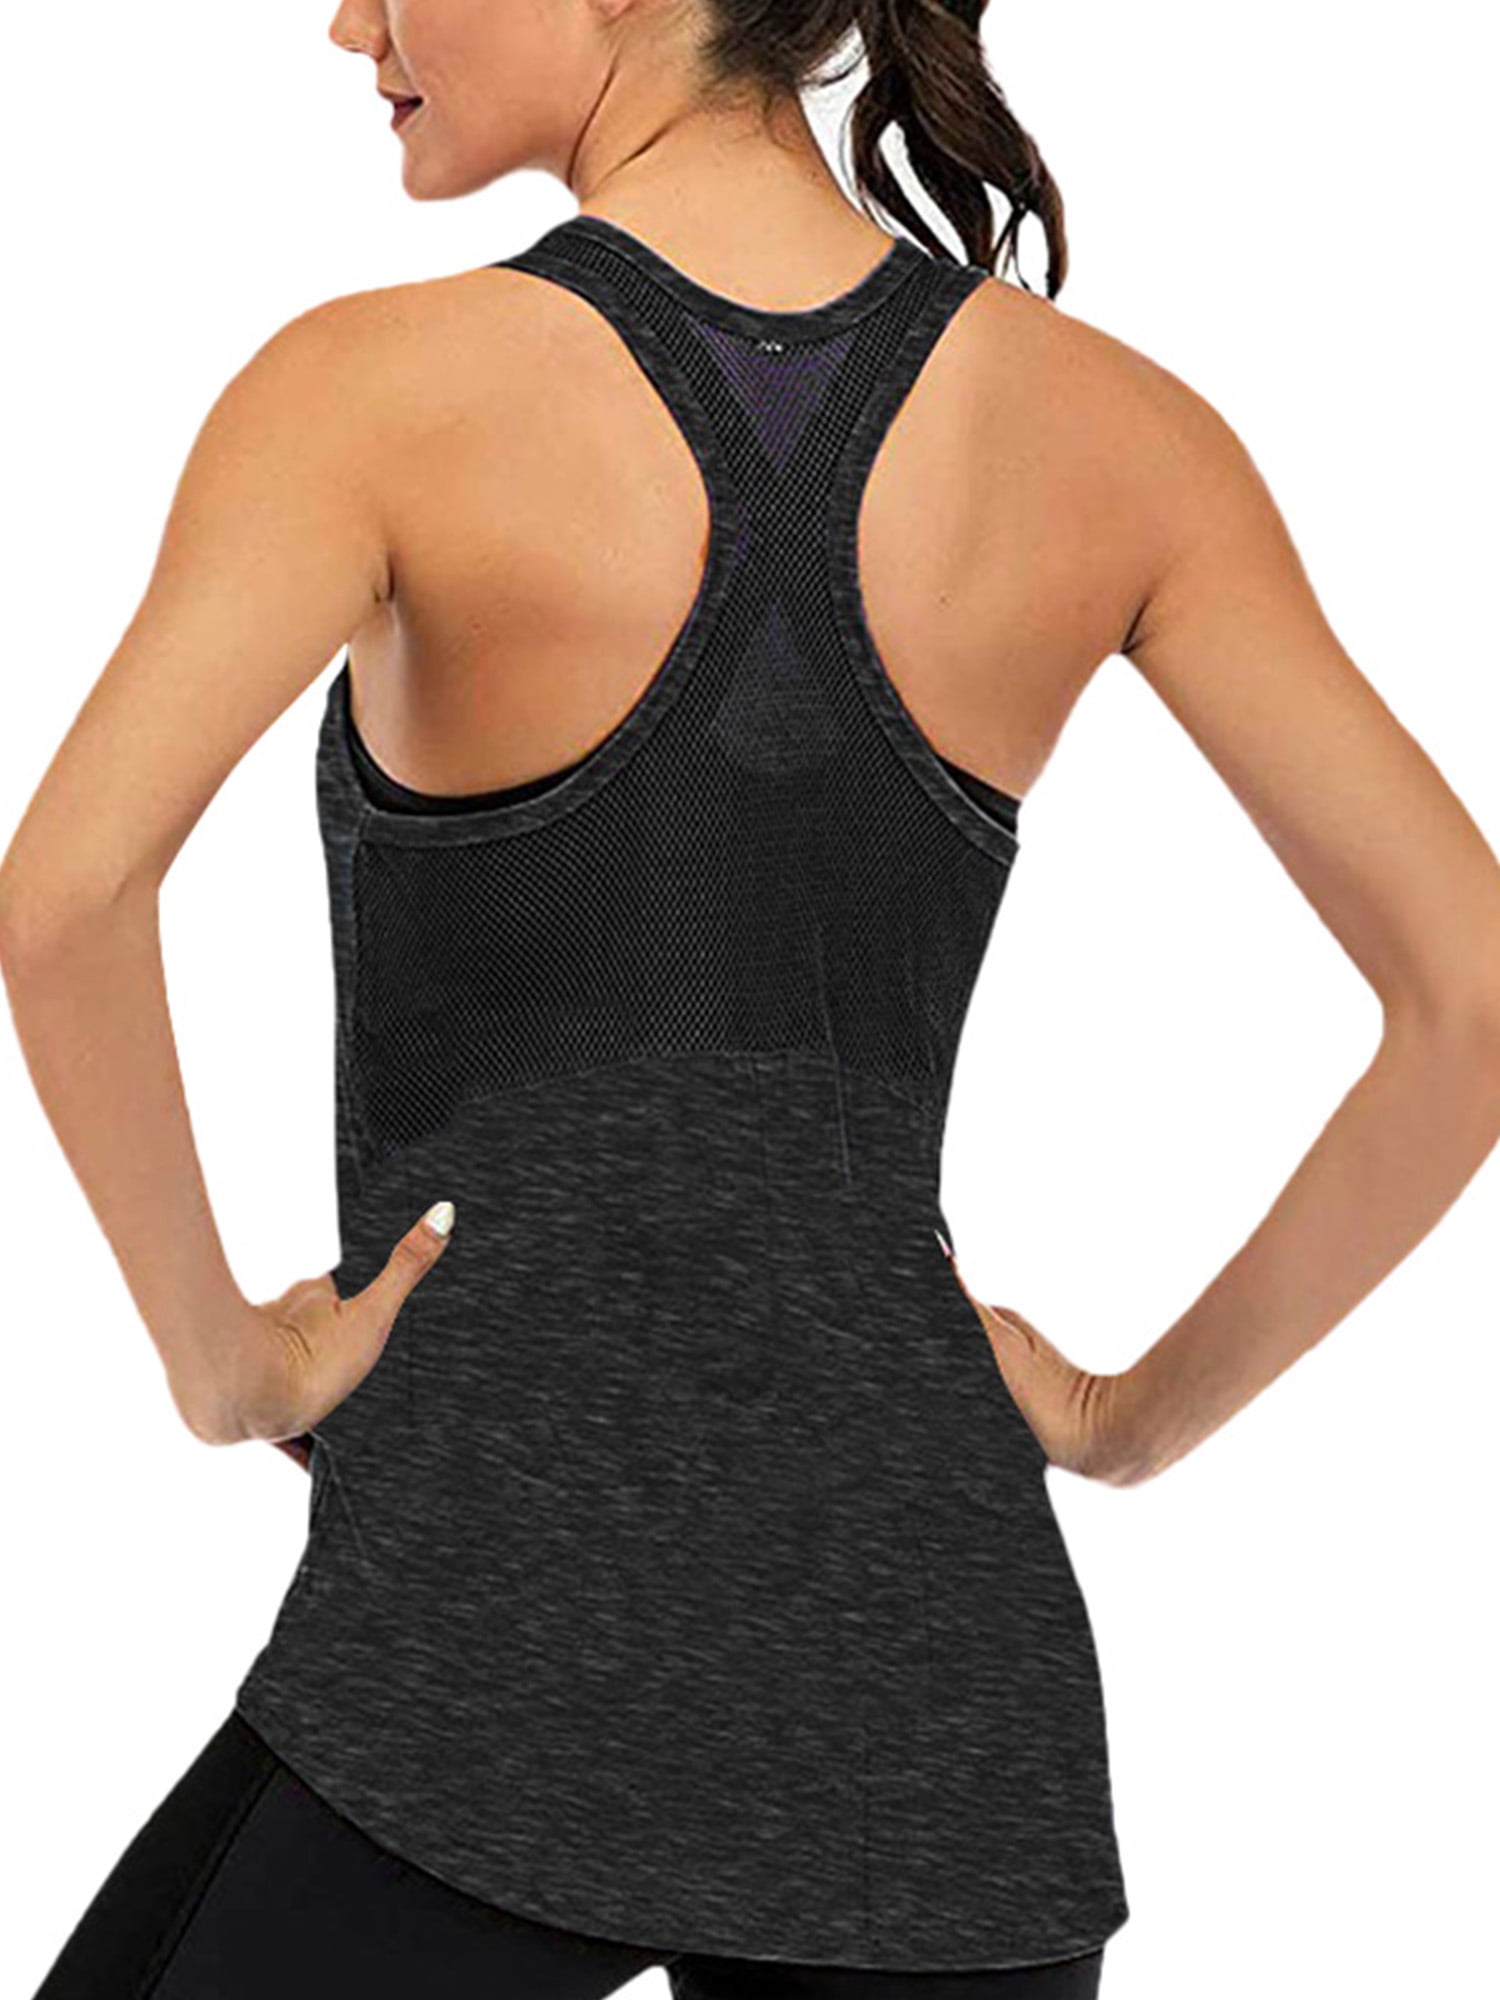 Tank Top with Built in Bra Womens Activewear Tops Workout Yoga Shirts Athletic Tops